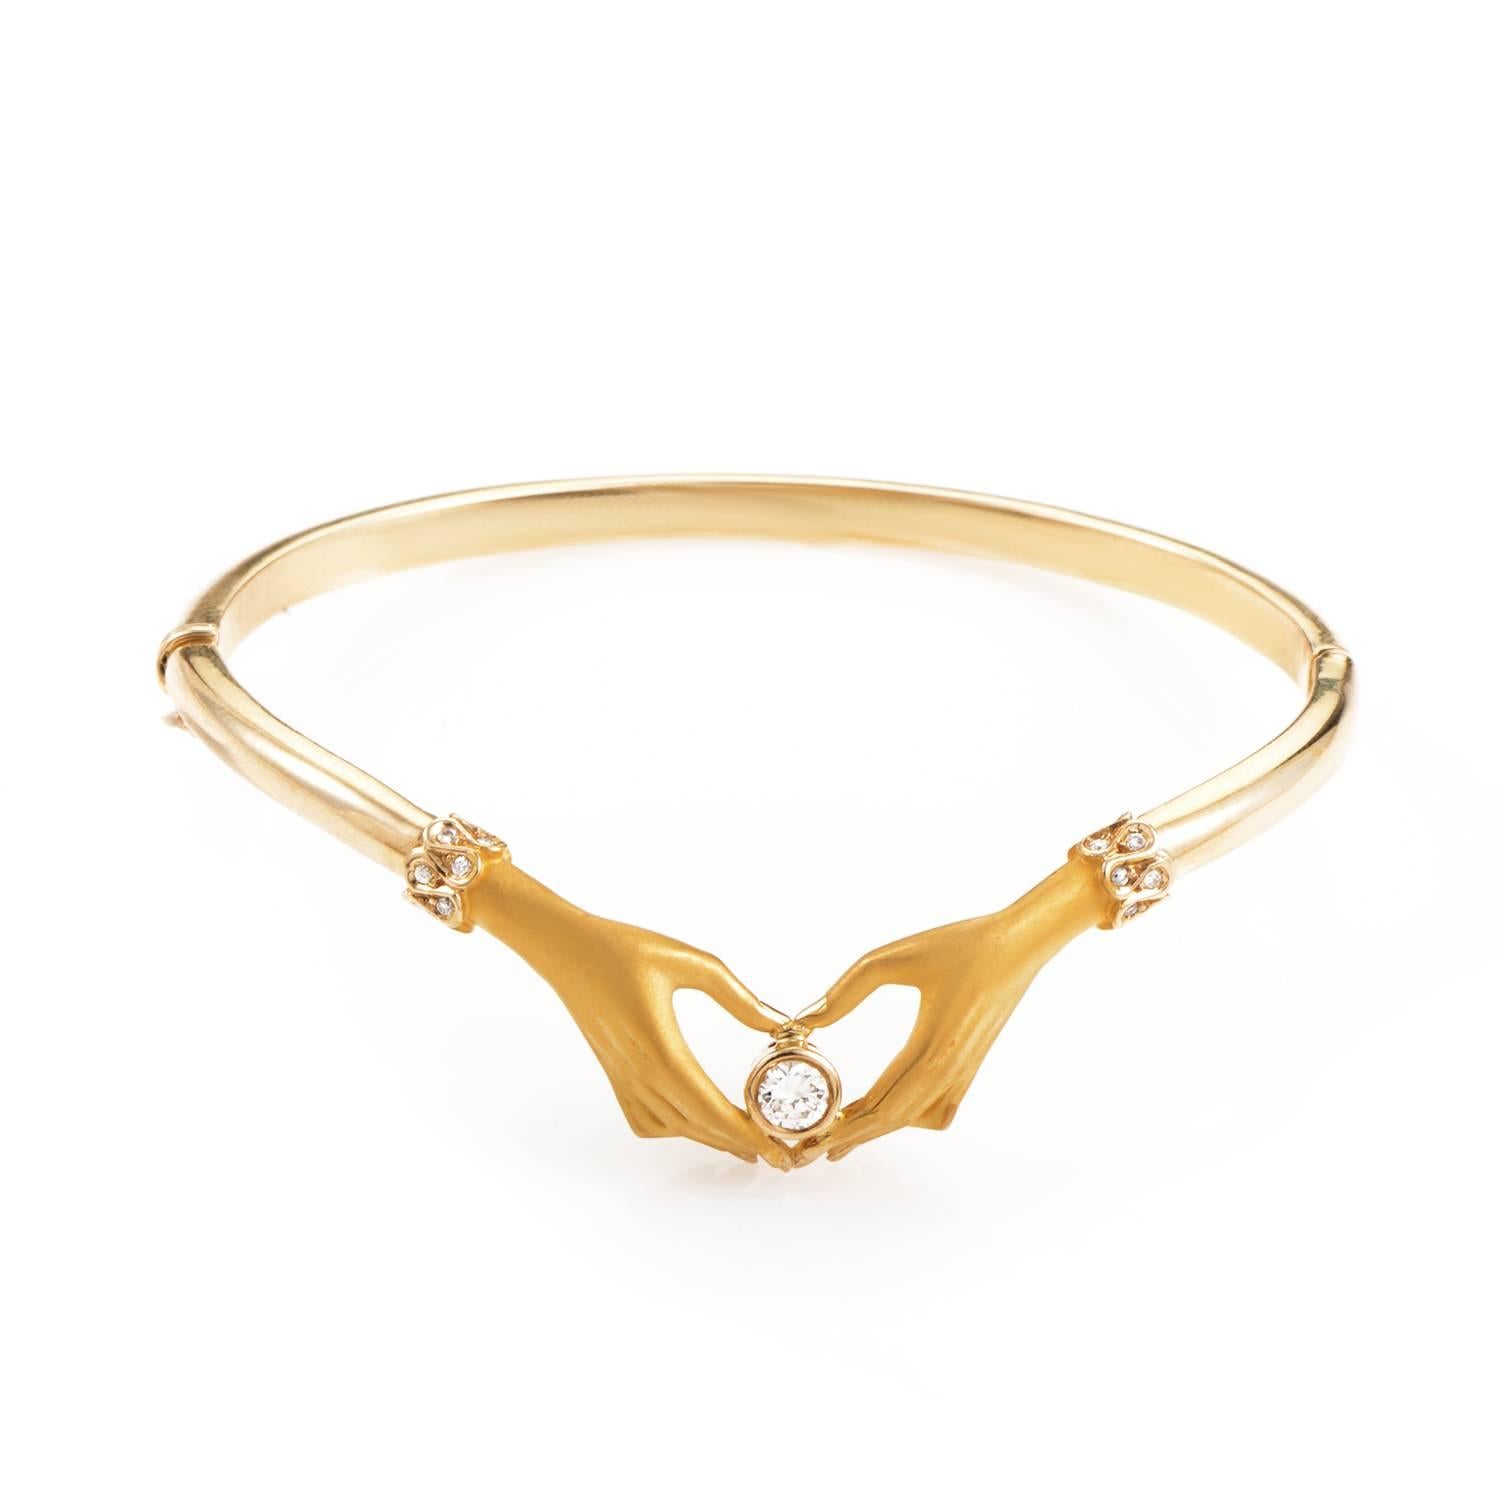 This gorgeous bangle from Carrera y Carrera is absolutely breathtaking. It is made of 18K yellow gold and features two dainty hands cupping an exquisite diamond. Both hands are accented by small diamond 